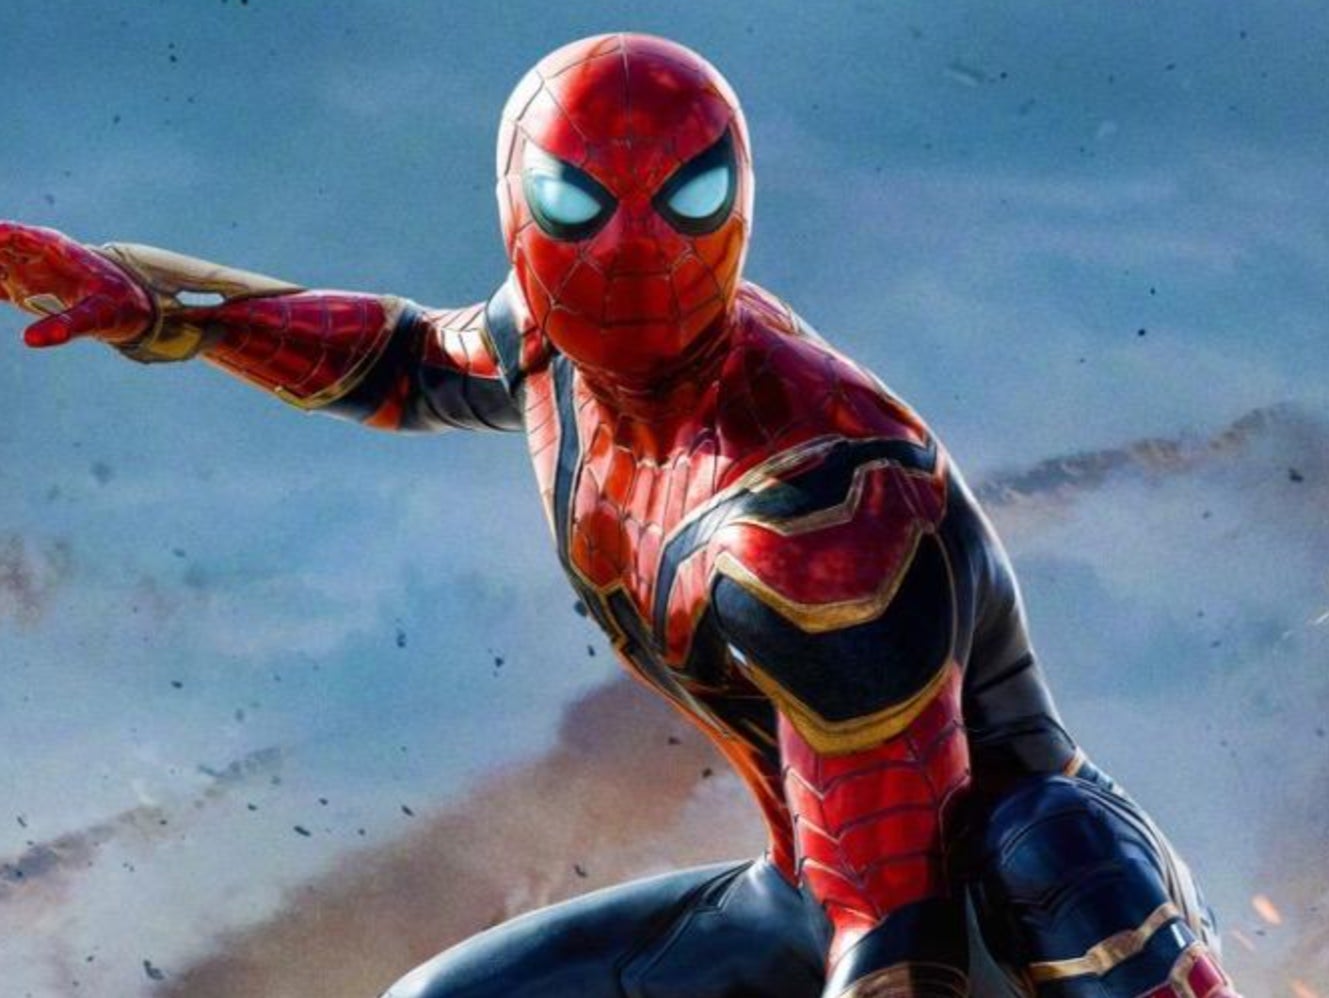 ‘Spider-Man: No Way Home’ tickets have gone on sale and the memes are coming in amid the chaos